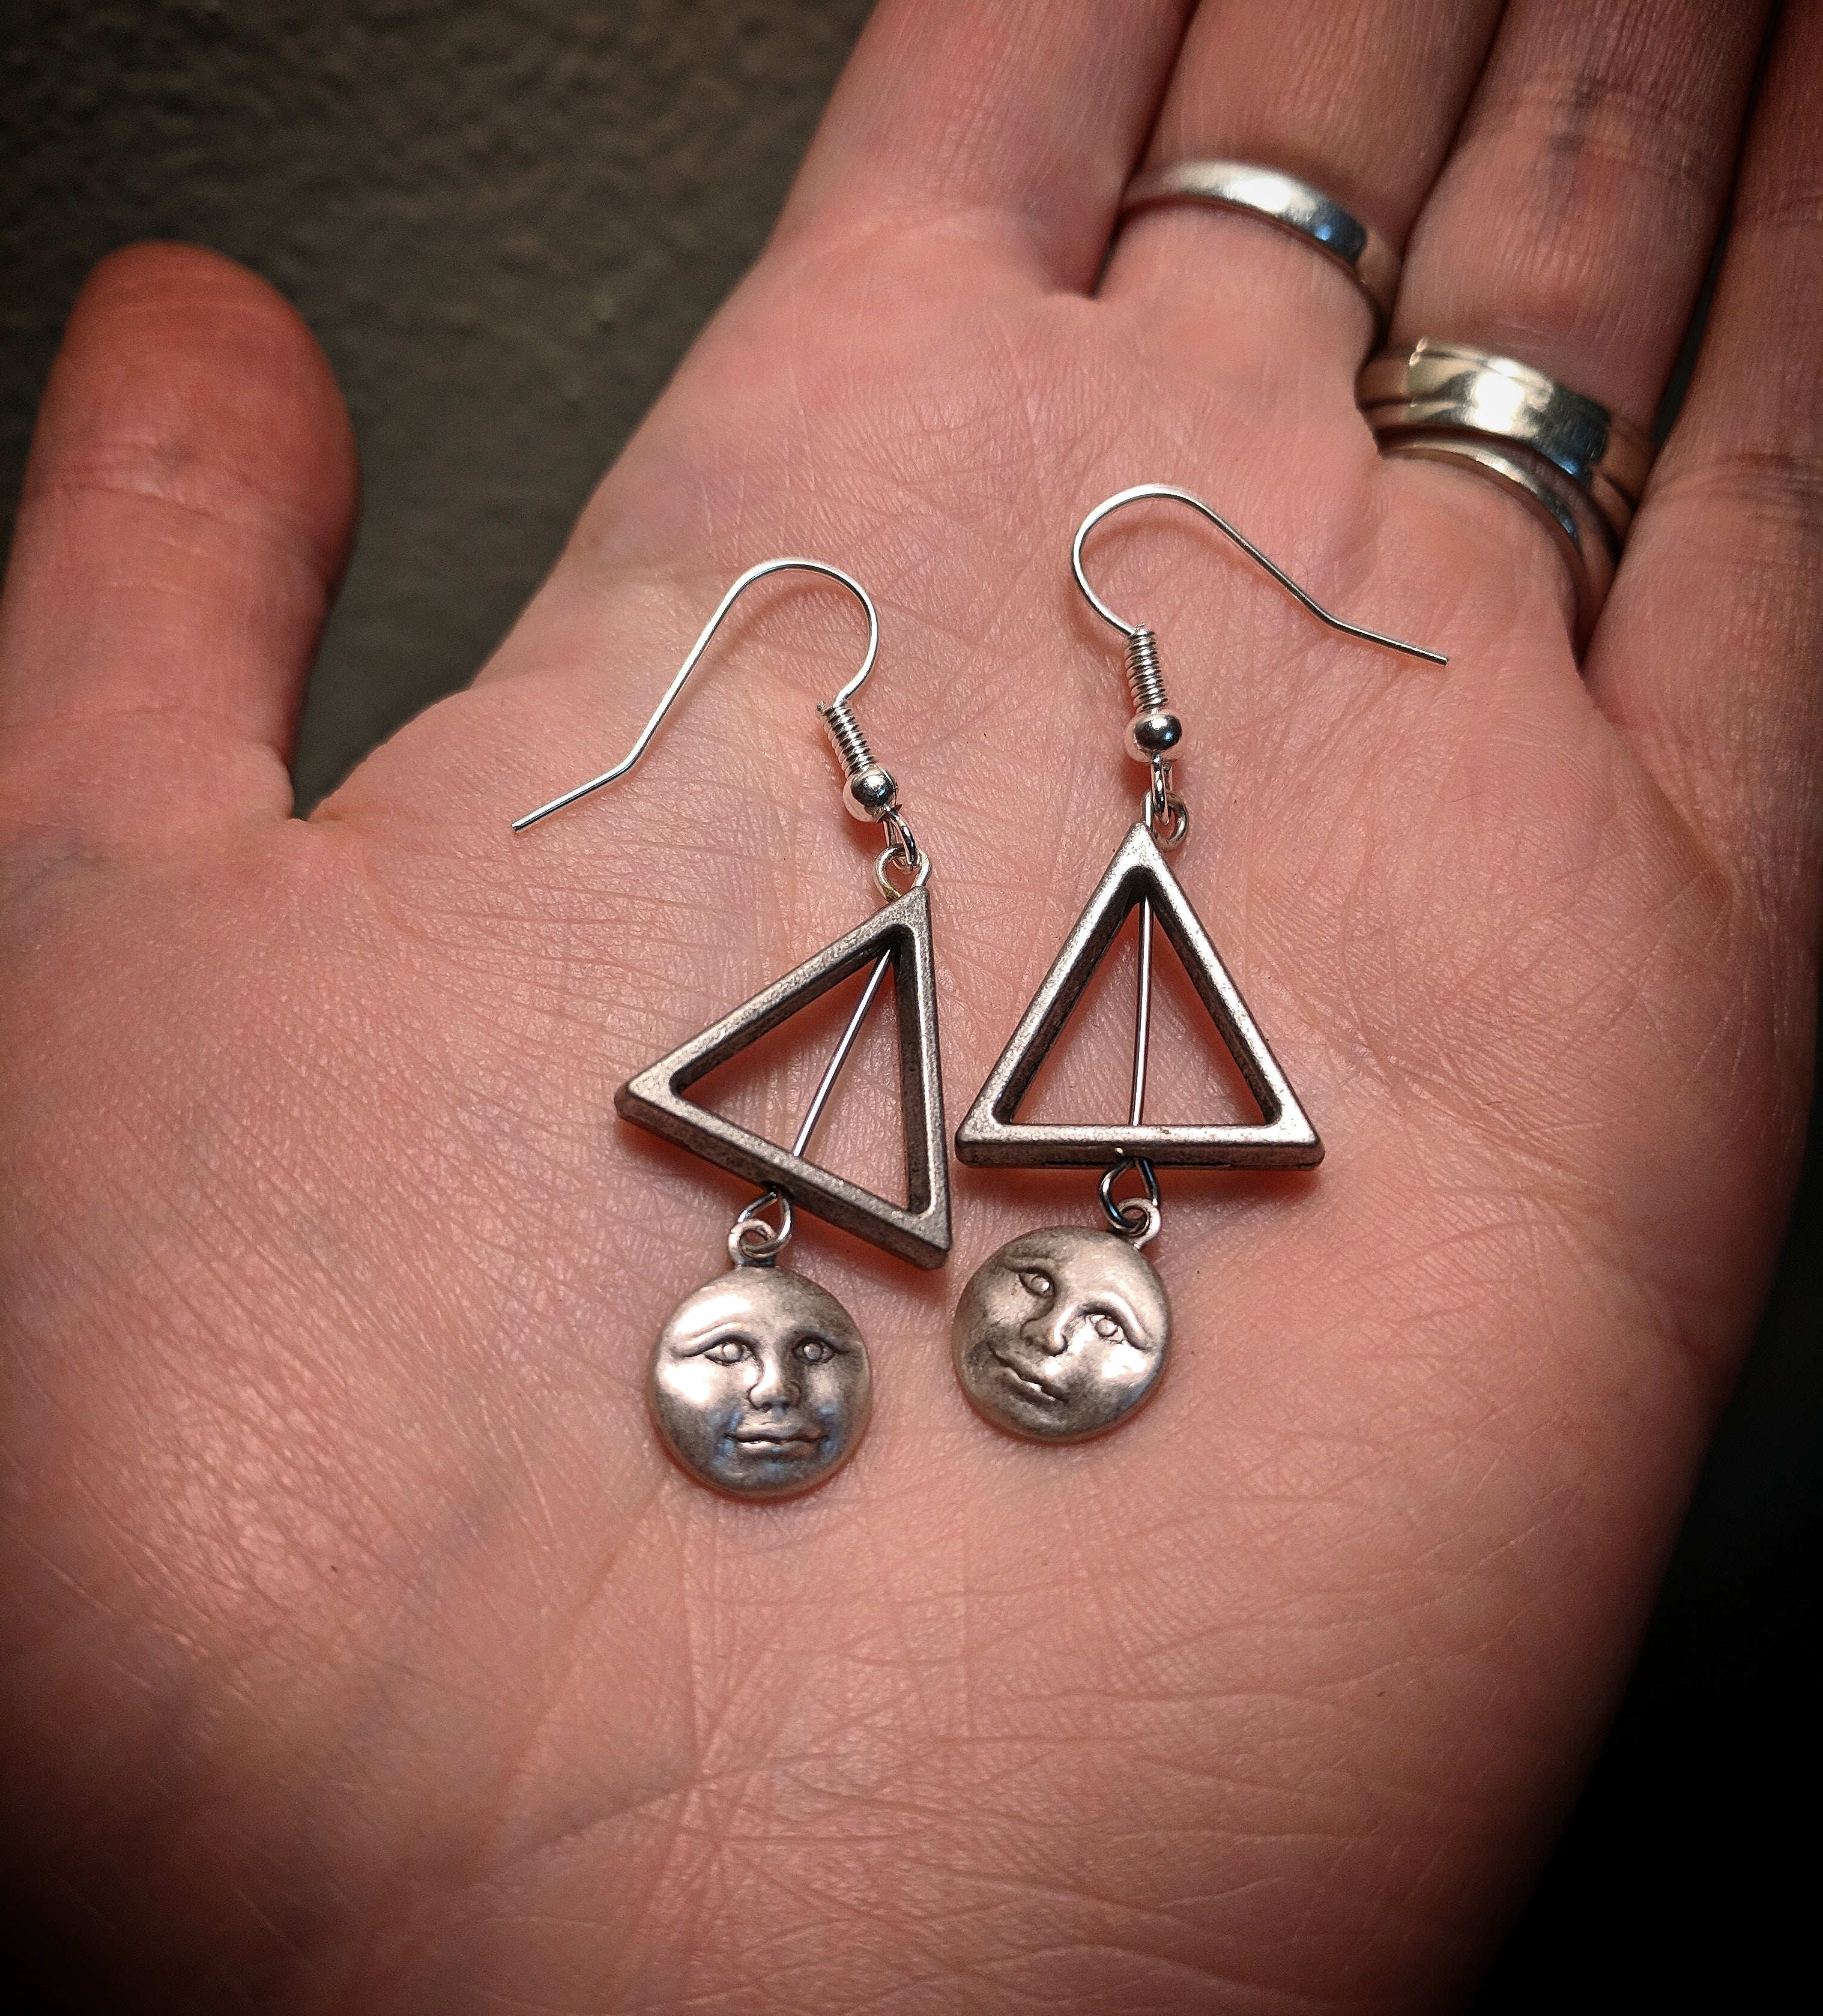 Silver Colored Man On The Moon Triangle Earrings With Surgical Stainless Steel Ear Hooks